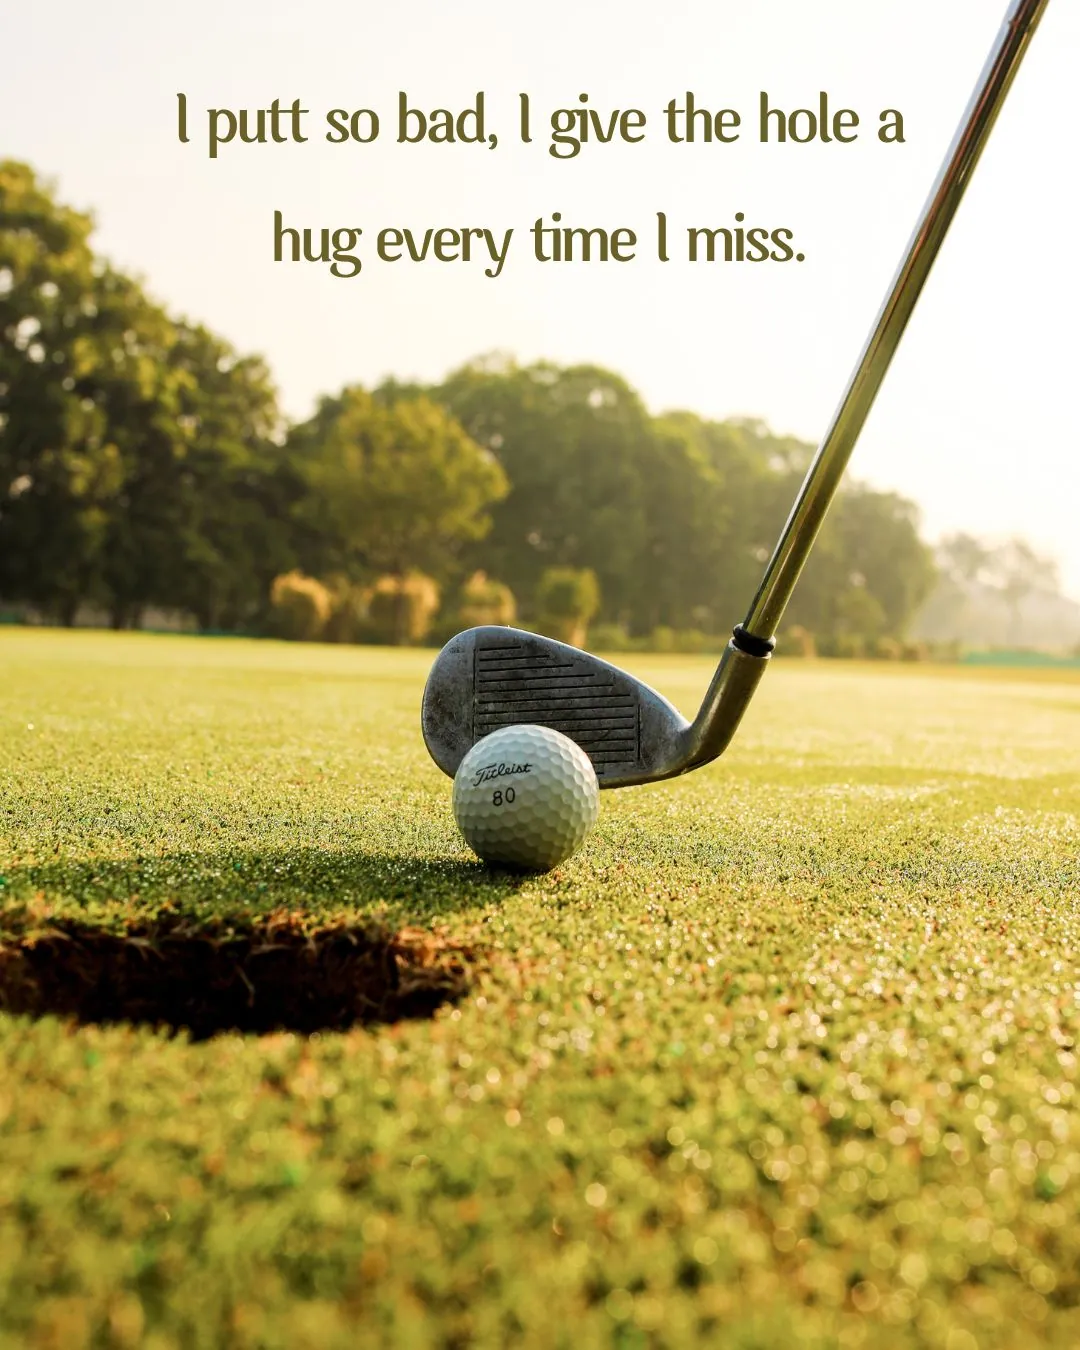 Funny Golf Quotes Putting